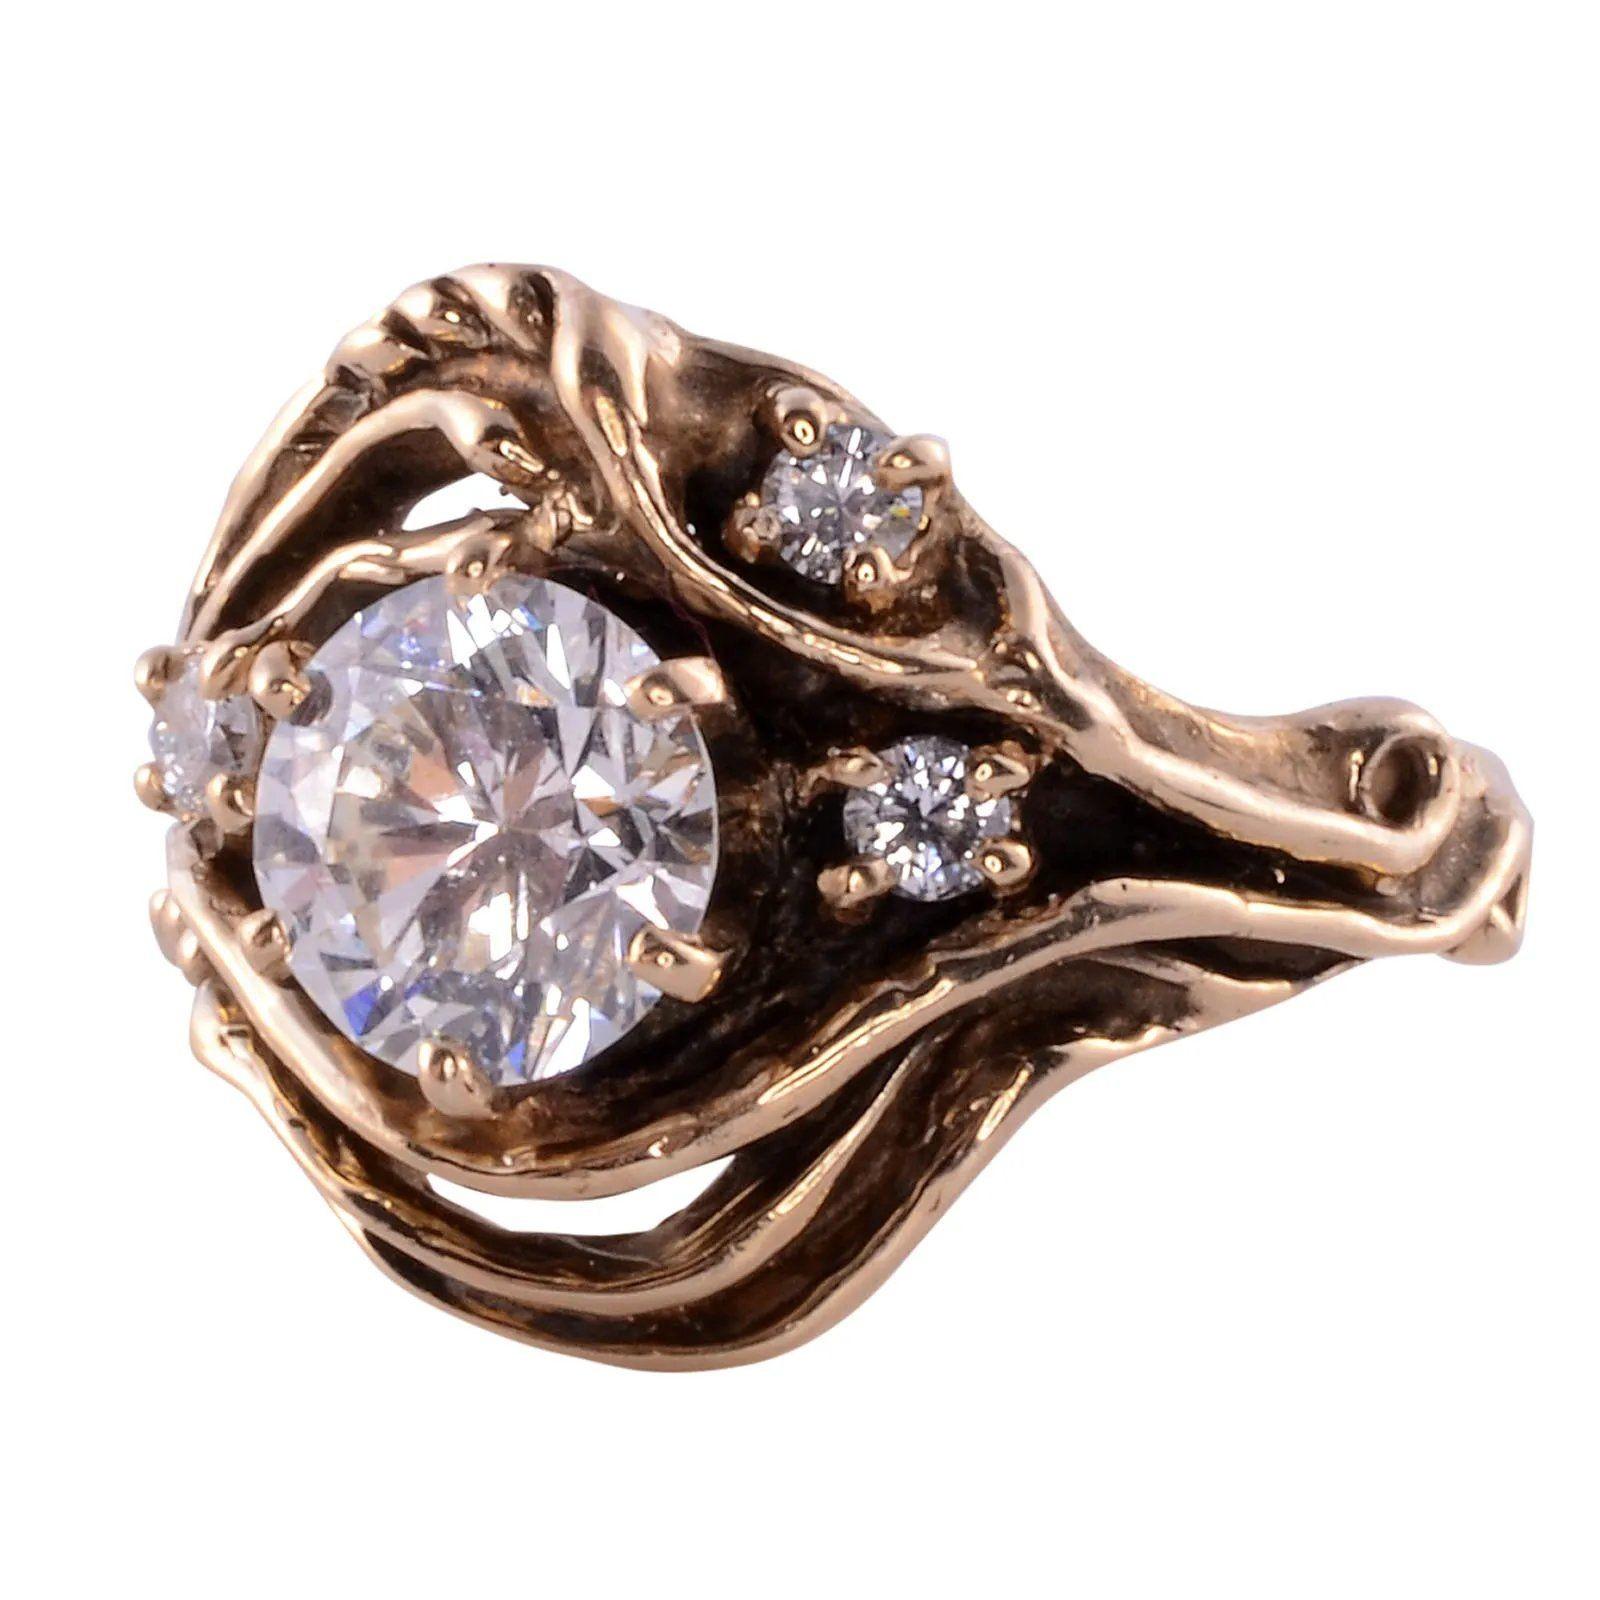 Estate 1.42 carat VS2 center diamond ring, circa 1980. This 14 karat yellow gold ring features a 1.42 carat center diamond having VS2 clarity and K color. There are also three accent diamonds at .11 carat total weight having SI clarity and I-J